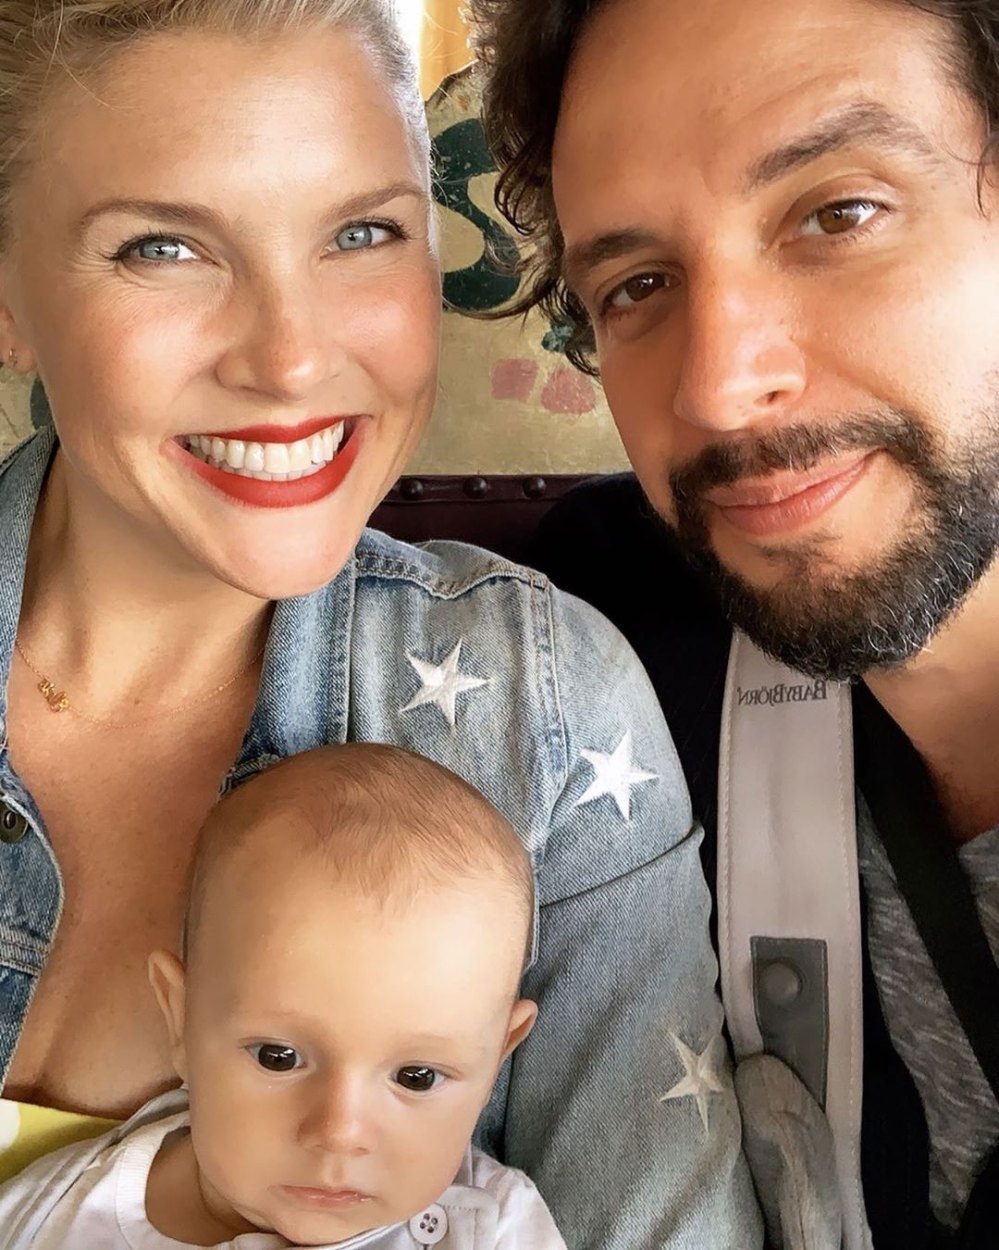 Amanda Kloots Son Elvis 1st Words Have Sweet Connection to Late Dad Nick Cordero Family Photo